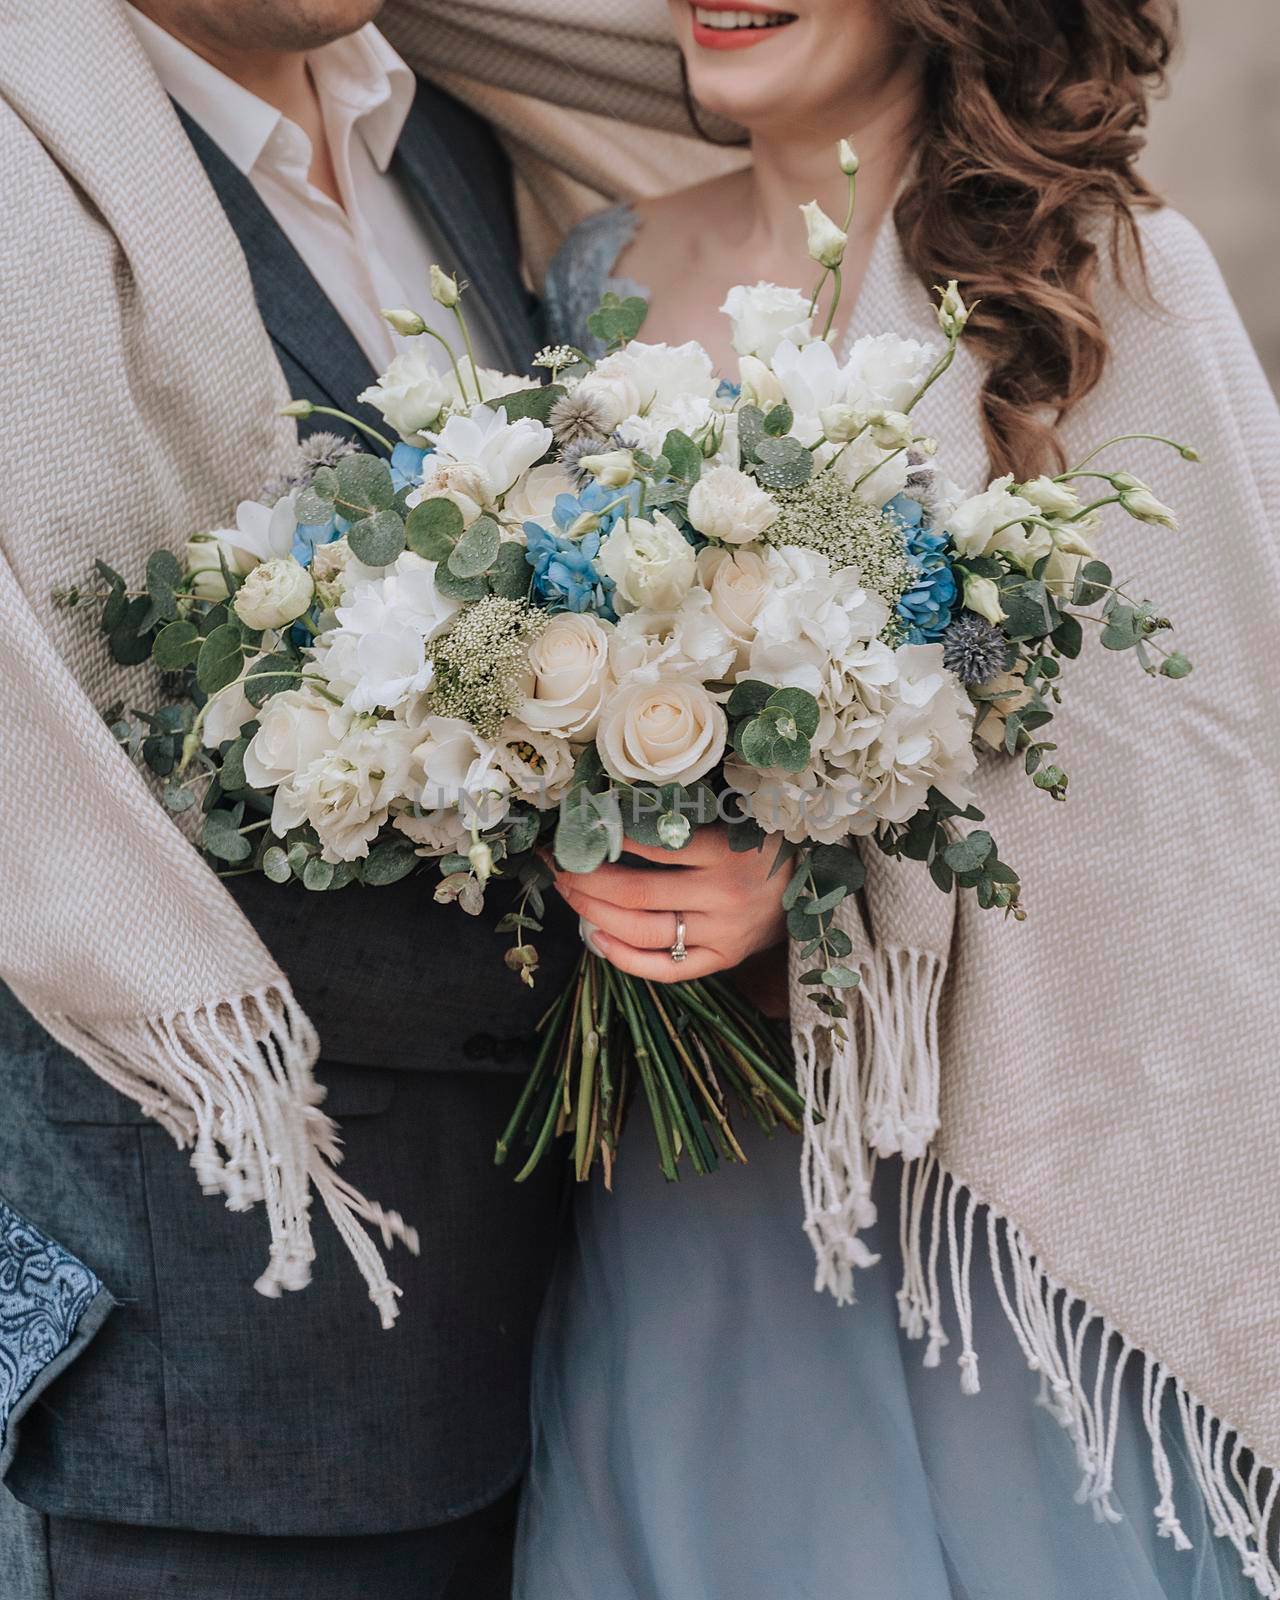 the couple is embracing holding a beautiful bouquet of flowers, the girl is wearing a blue long dress, the man is wearing a suit and a plaid is thrown over. wedding concept